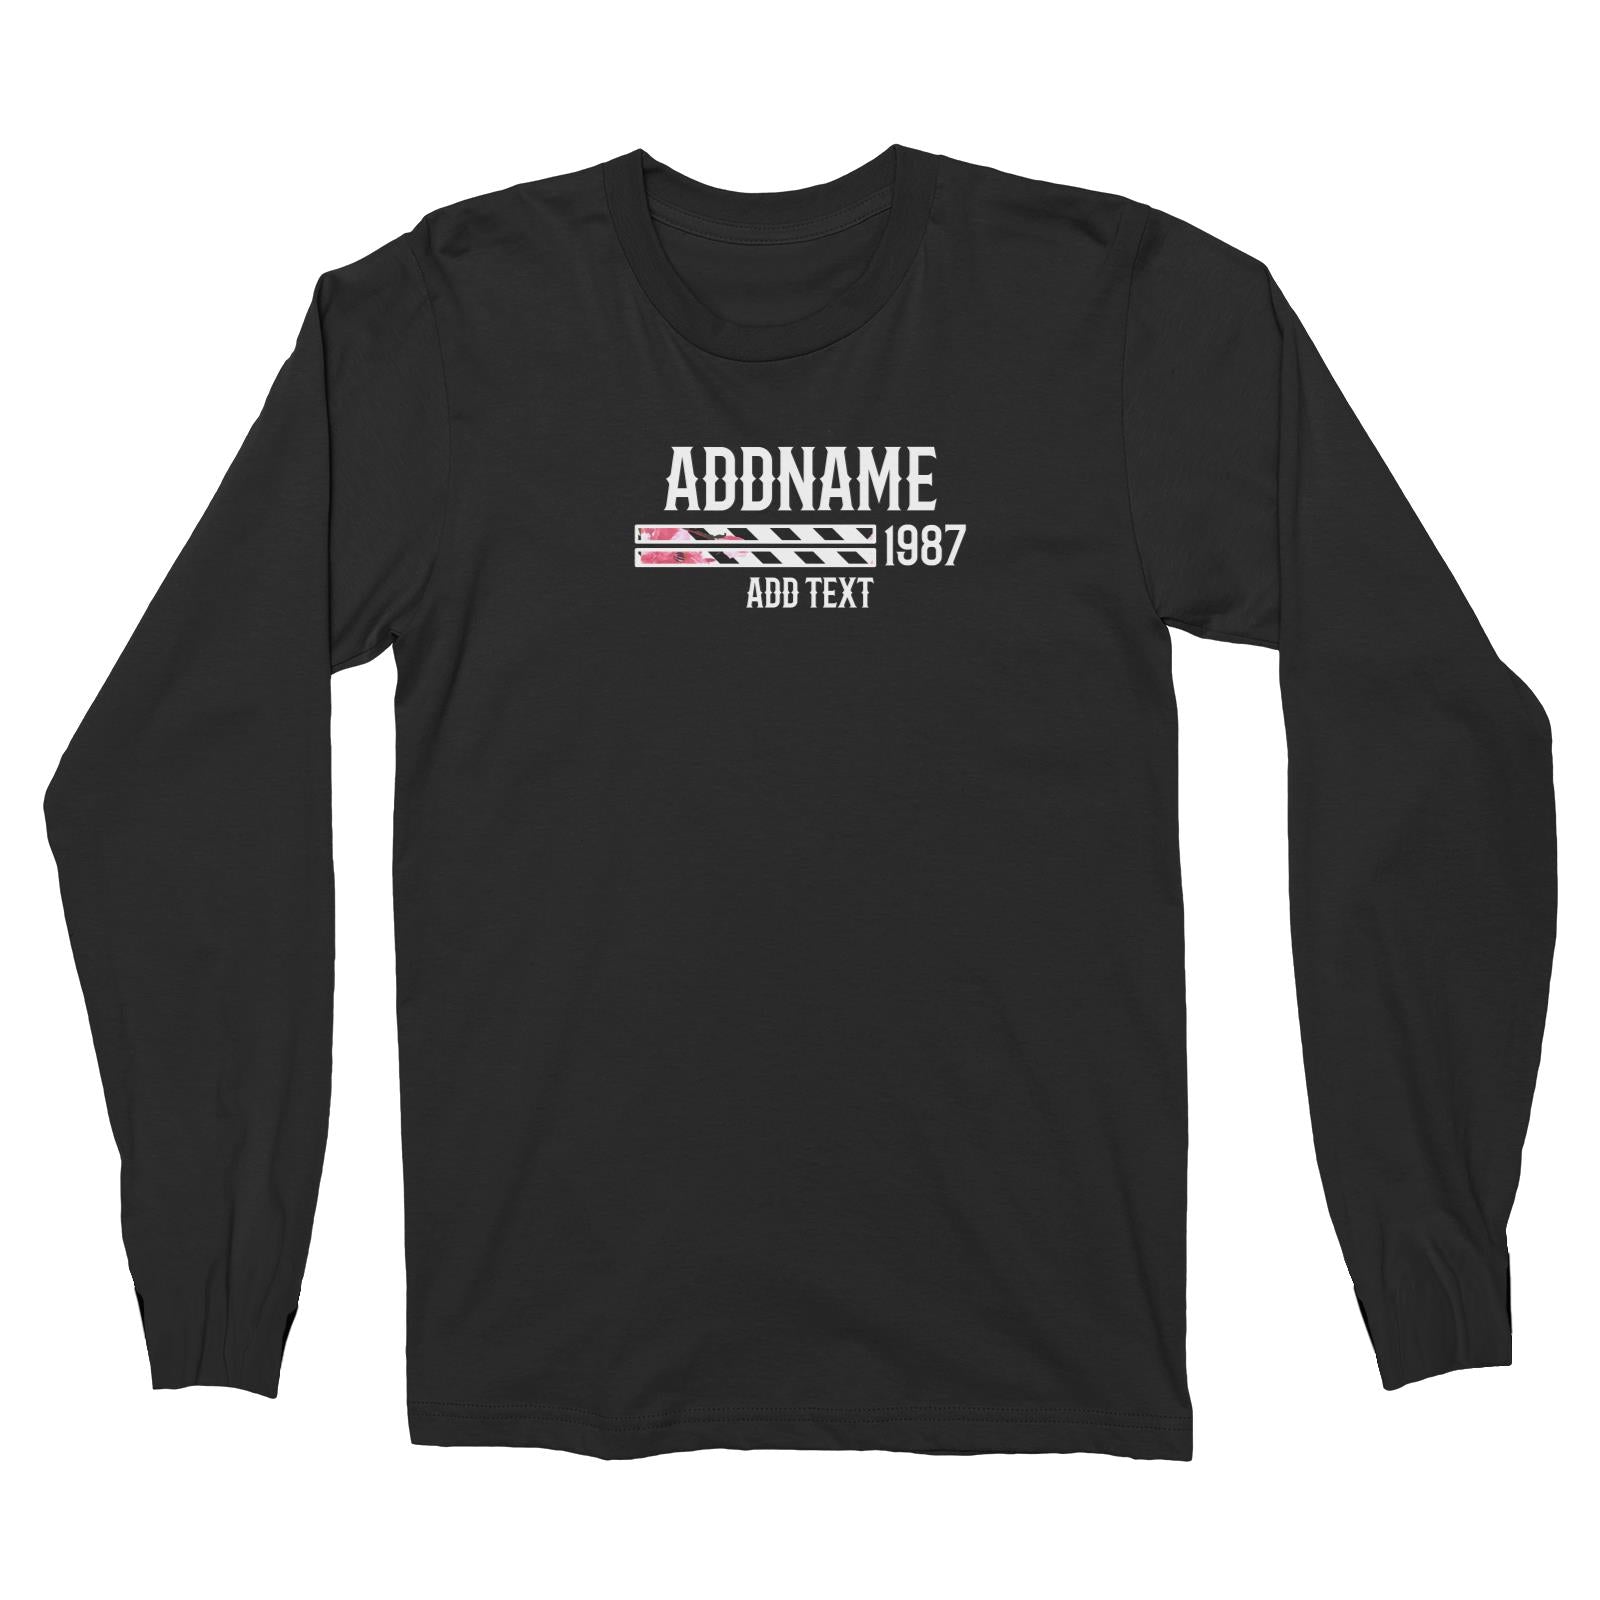 Pink Hibiscus Flower Stripes Bars Personalizable with Name Year and Text Long Sleeve Unisex T-Shirt